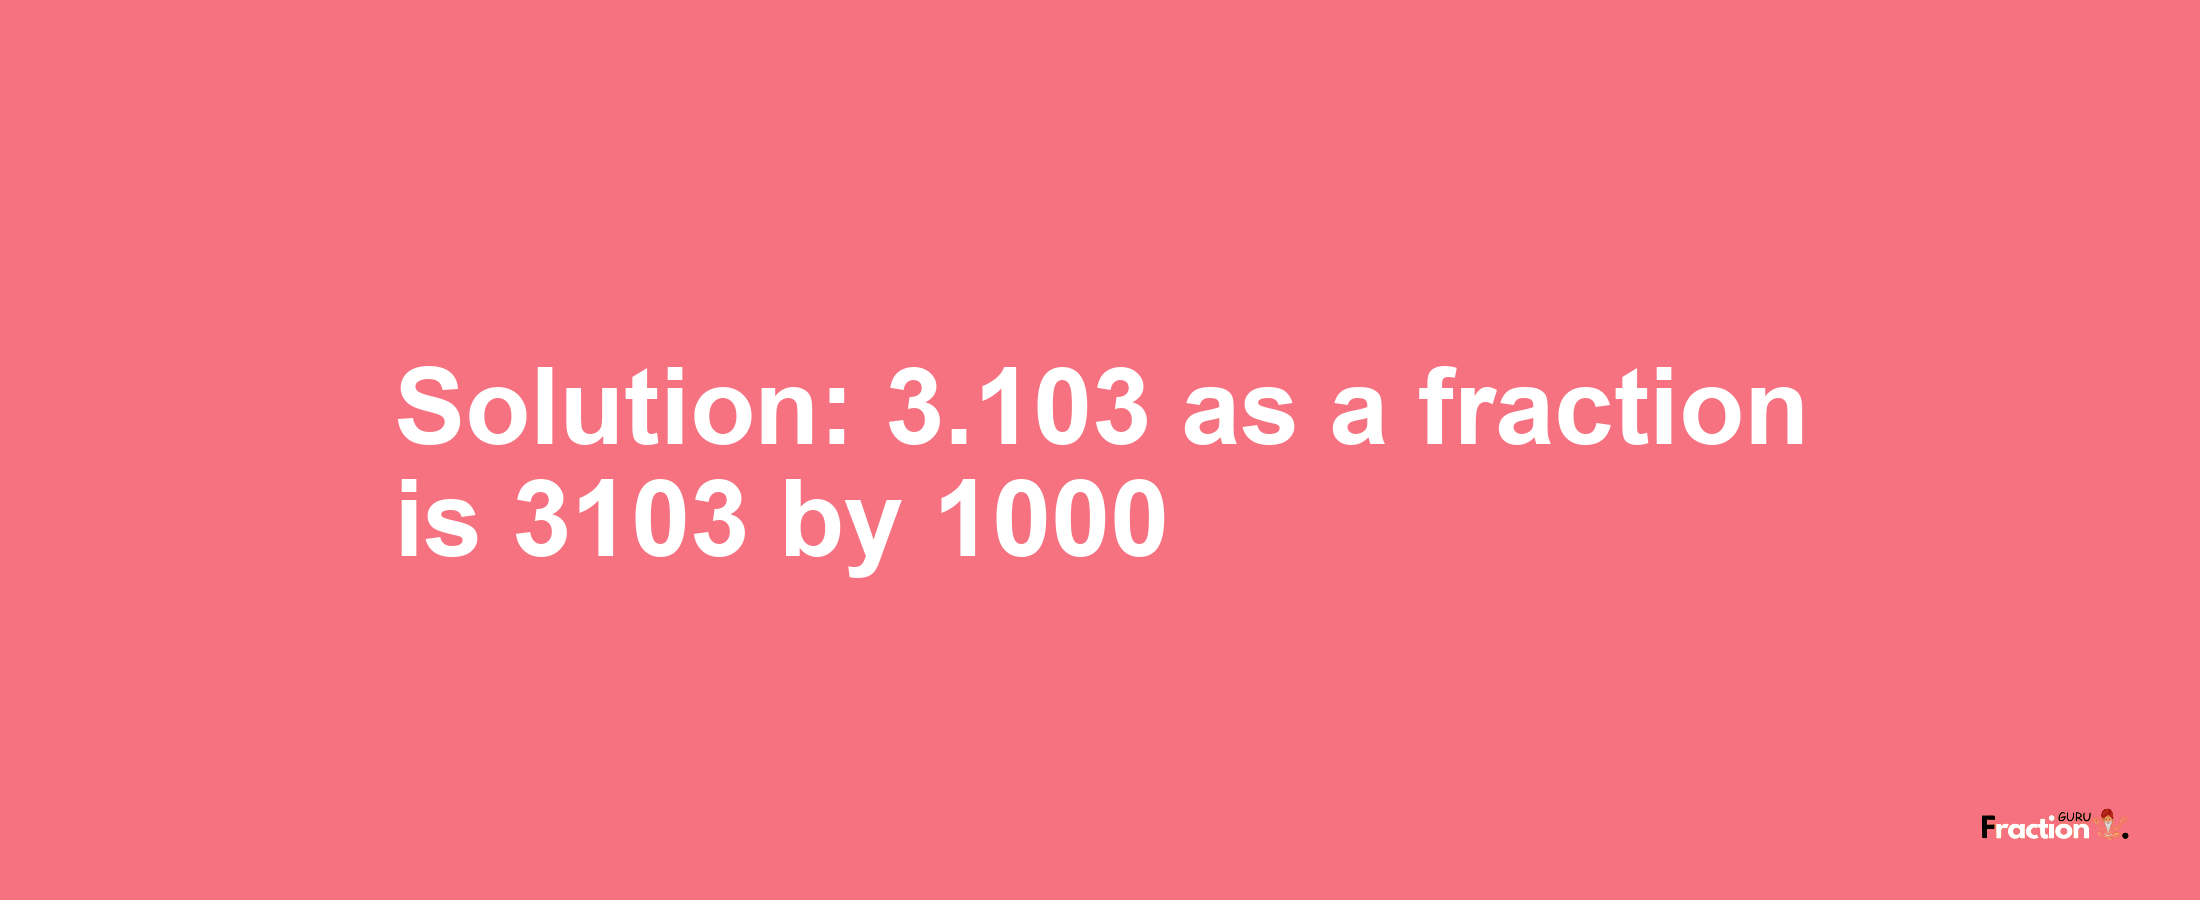 Solution:3.103 as a fraction is 3103/1000